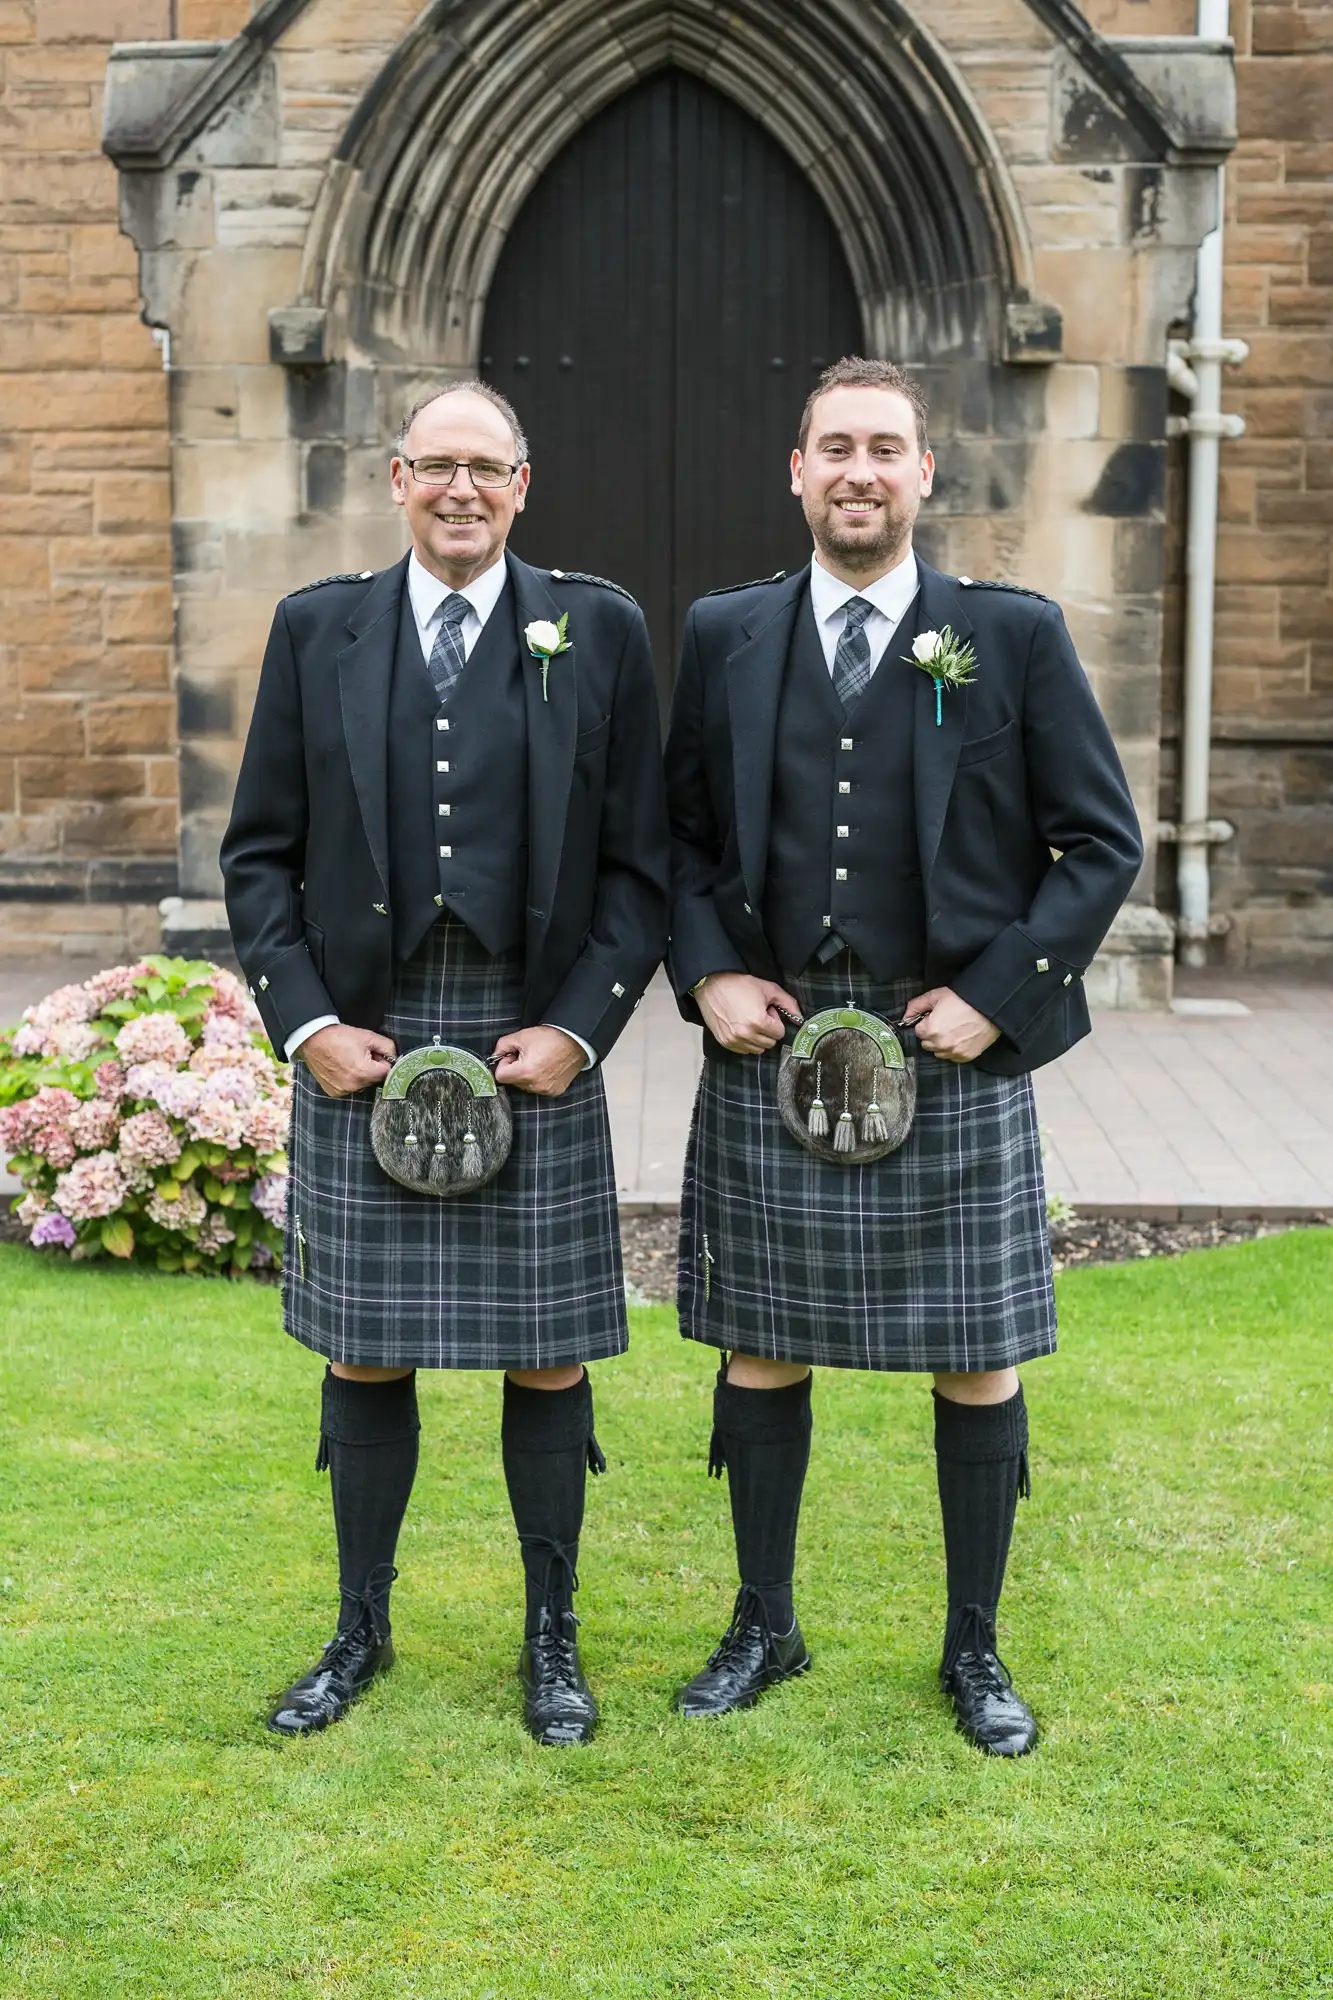 Two men in traditional scottish kilts and jackets, smiling, standing side by side in front of a stone church with flowers in the background.